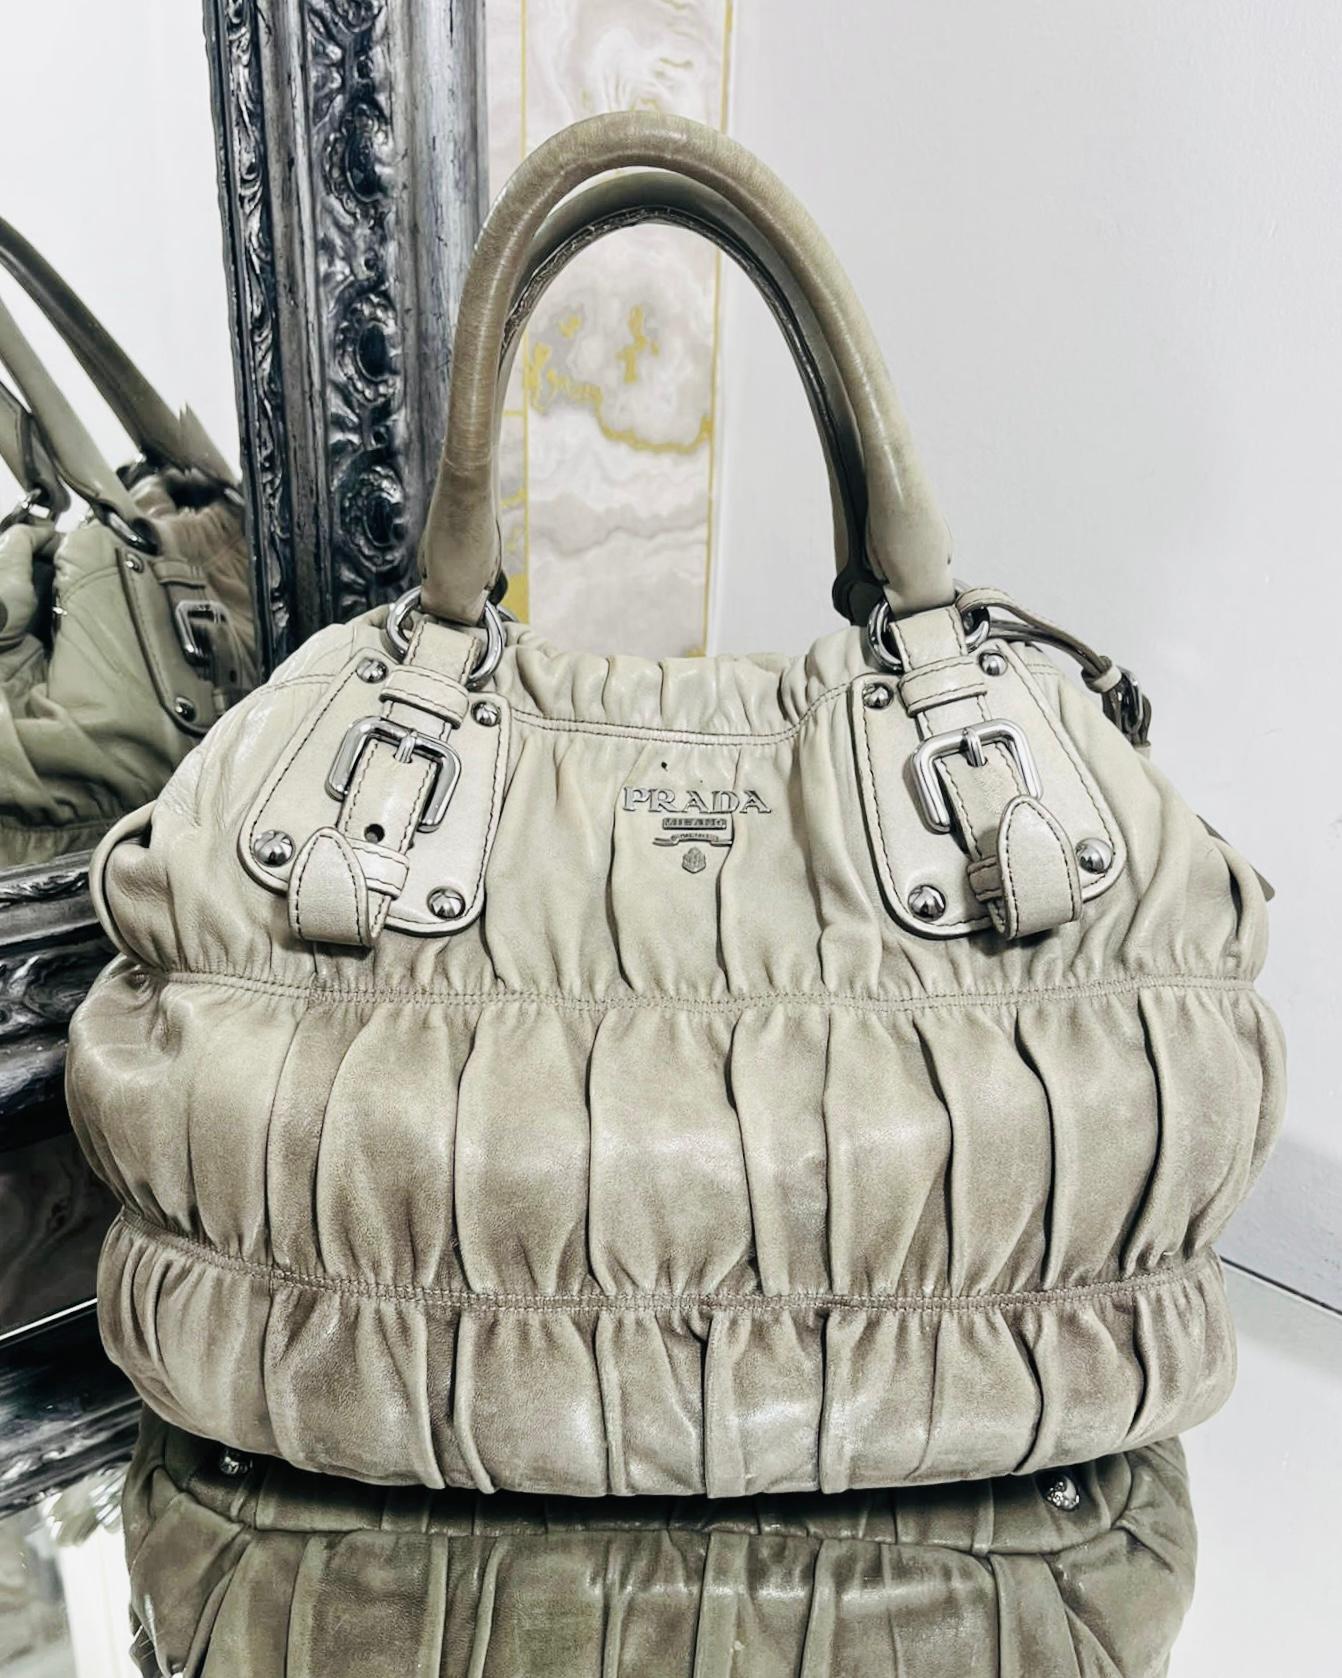 Prada Gaufre Leather Tote Bag

Dark dusty beige bag designed with silver 'Prada' logo to the front.

Detailed with soft ruched leather and buckles detailing to the rolled dual top handle.

Featuring leather tag attached and snap closure leading to